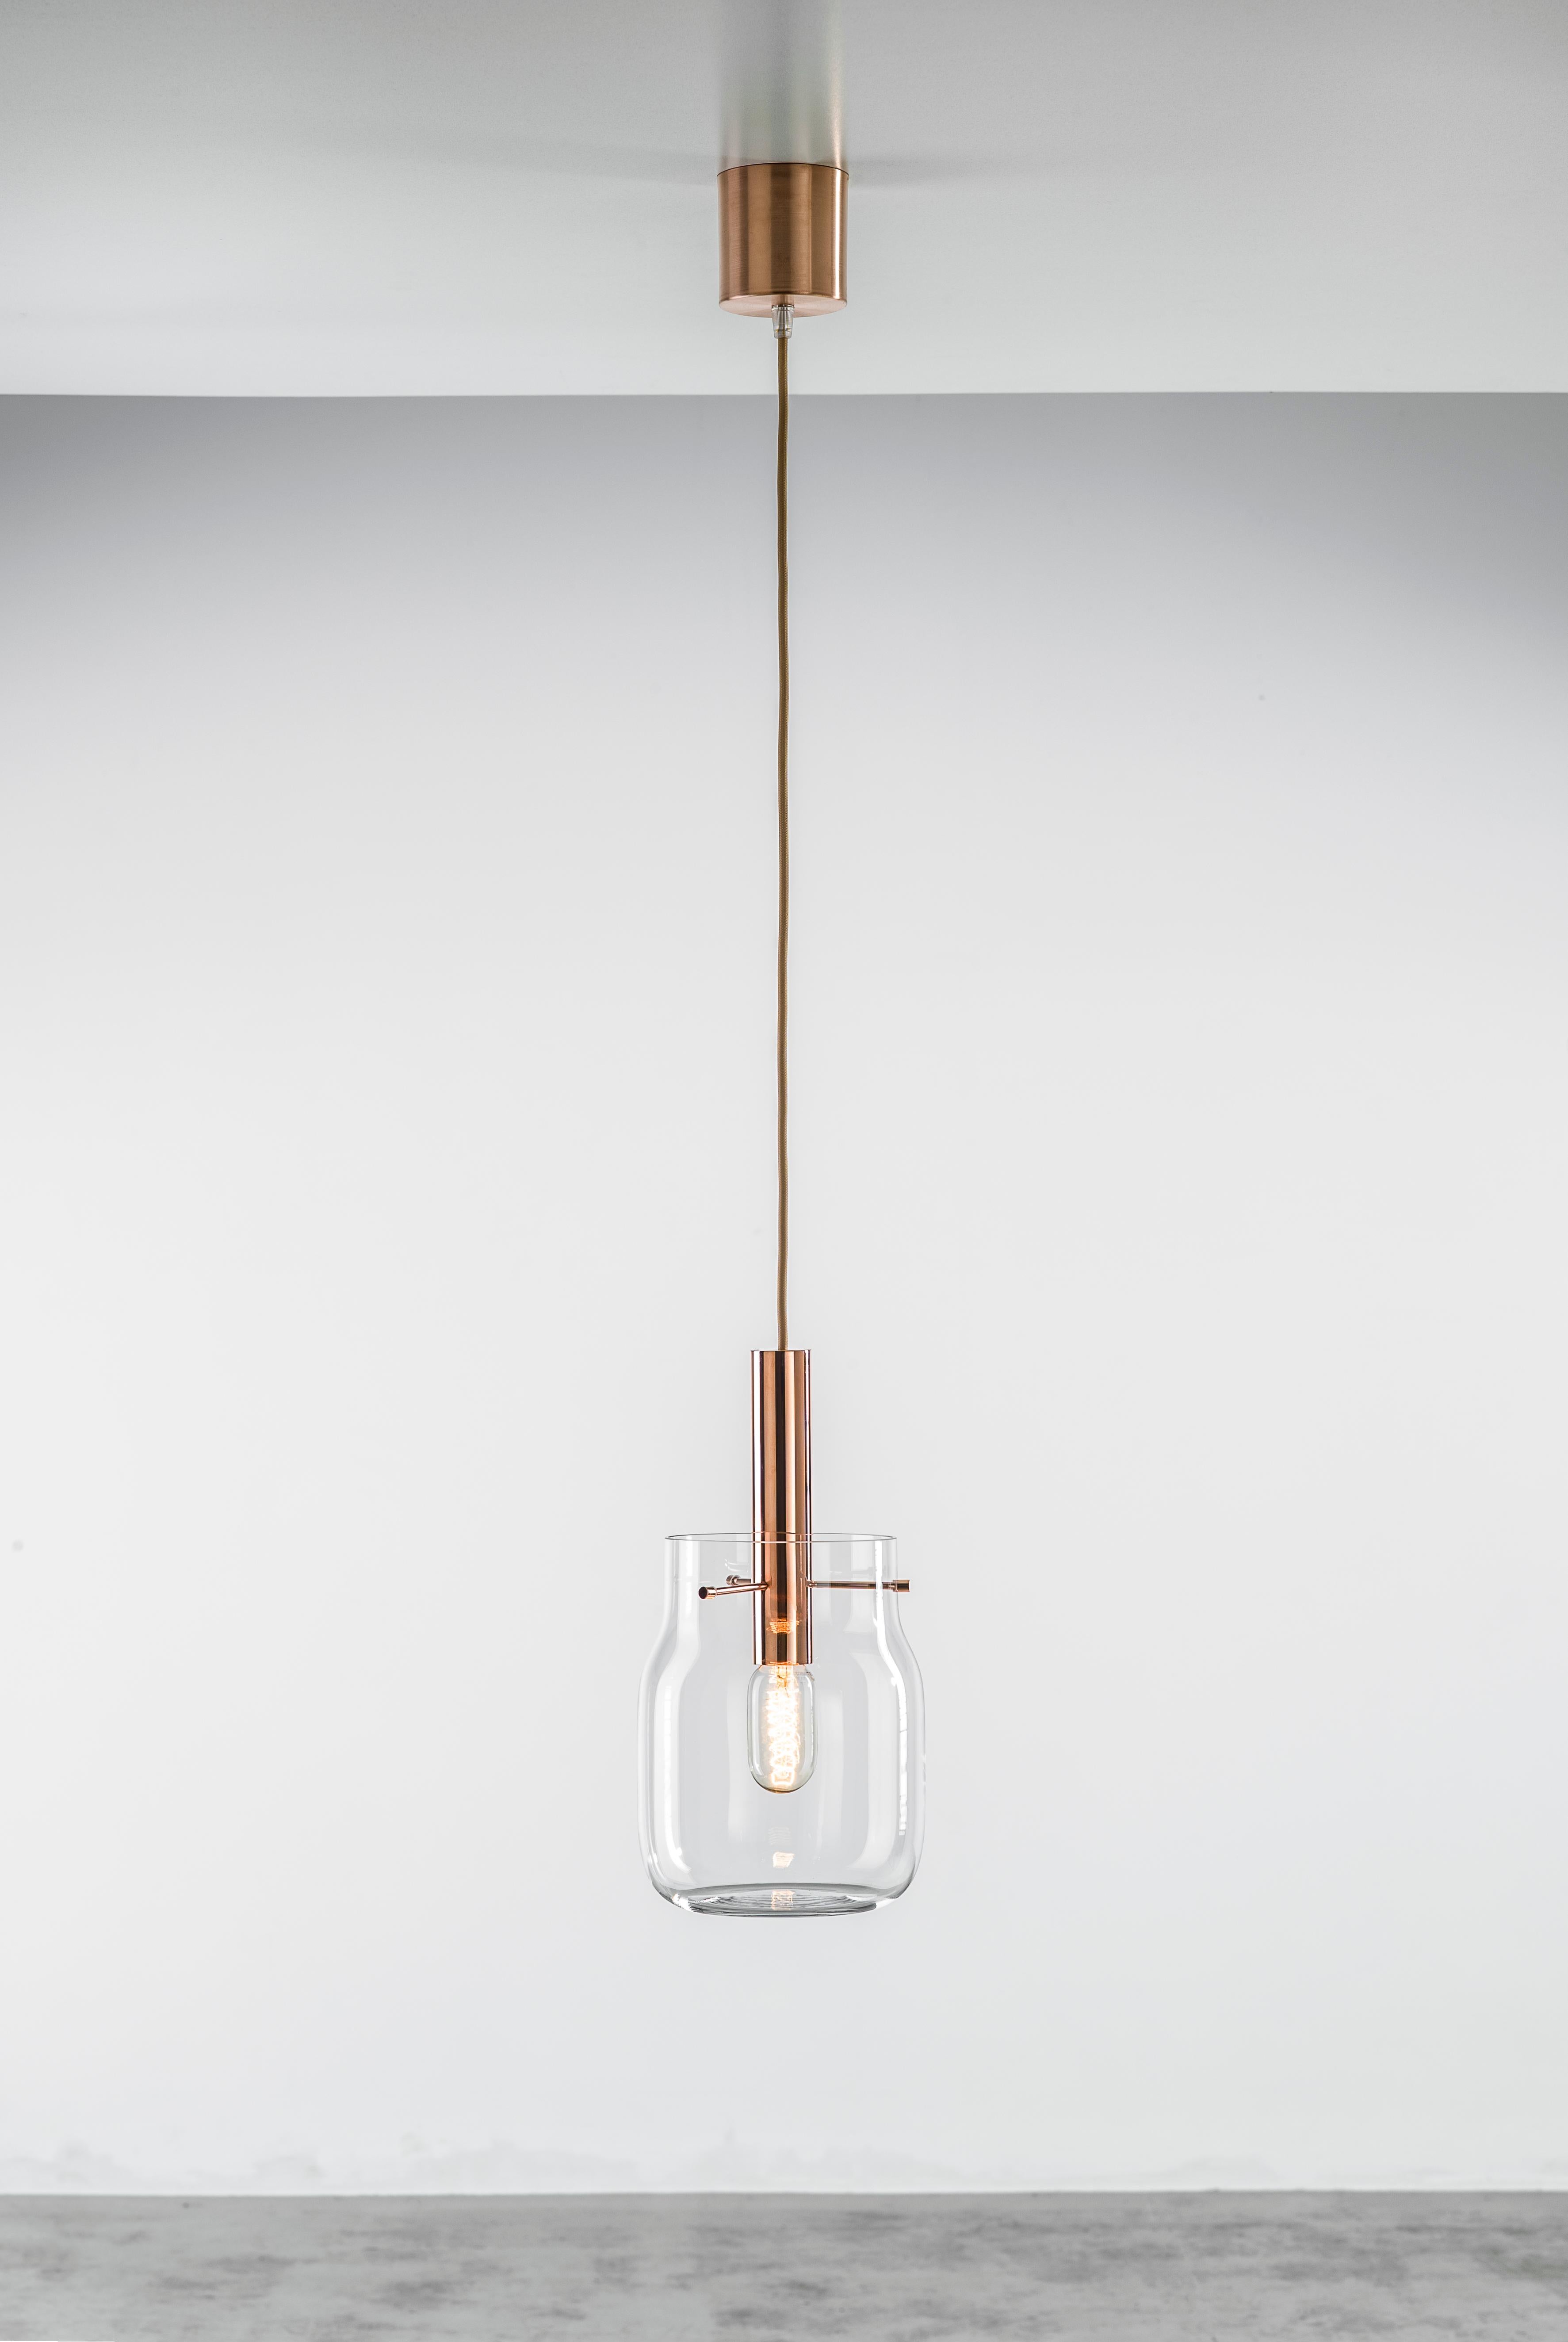 Set Of 2 Big Bandaska Pendant Light by Dechem Studio
Dimensions: D 18 x H 180 cm
Materials: Brass, Glass.
Also Available: Different colours and sizes available,

hand blown into beechwood moulds, Bandaska Lights is based on the highly popular